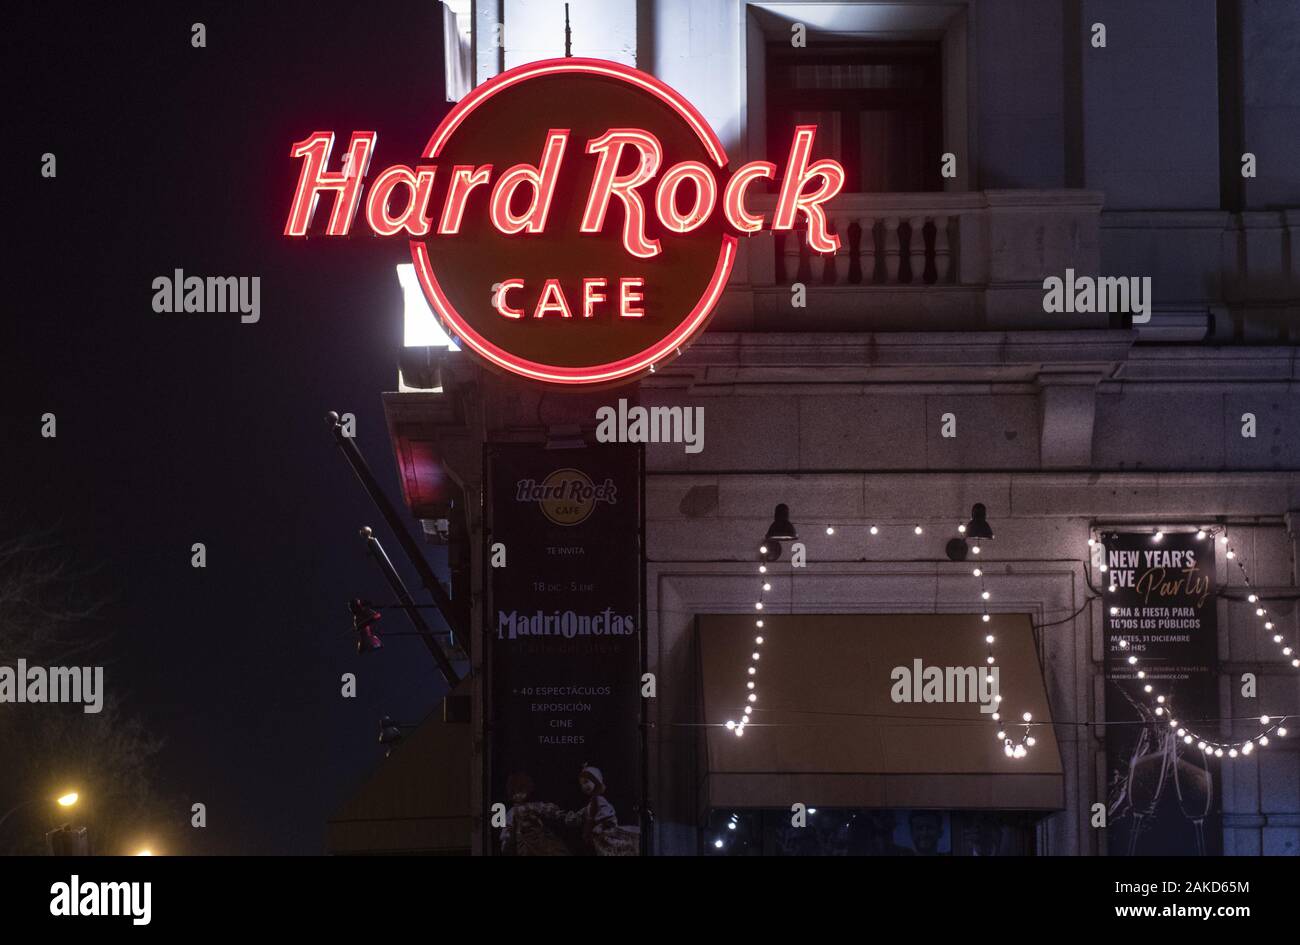 January 2, 2020, Spain: Chain of theme restaurants Hard Rock Cafe logo and restaurant seen in Spain. (Credit Image: © Budrul Chukrut/SOPA Images via ZUMA Wire) Stock Photo